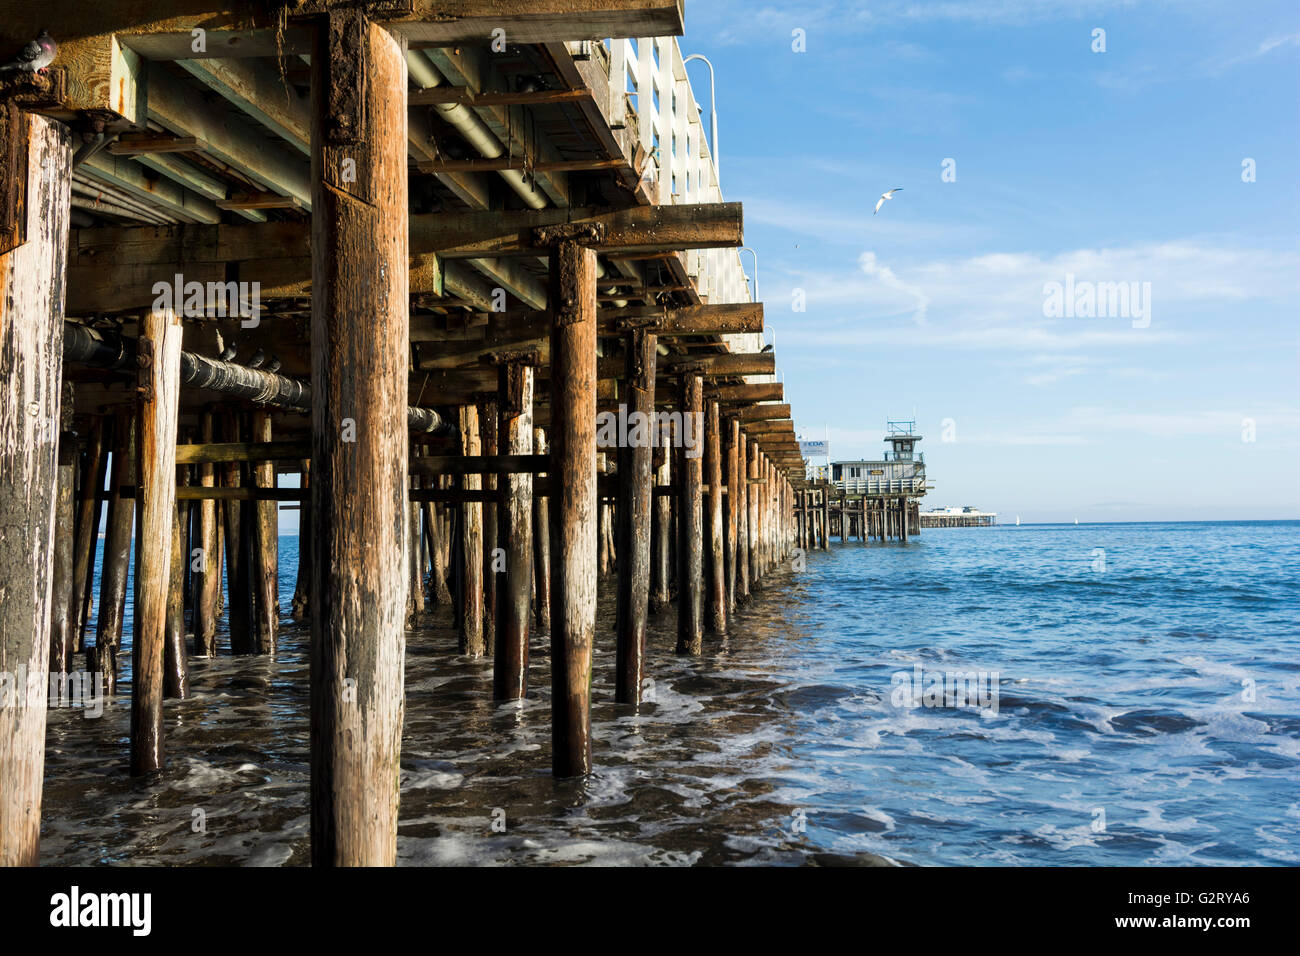 The view of the side of the pier and the symmetry of the architecture of it, Santa Cruz, California, USA. Stock Photo